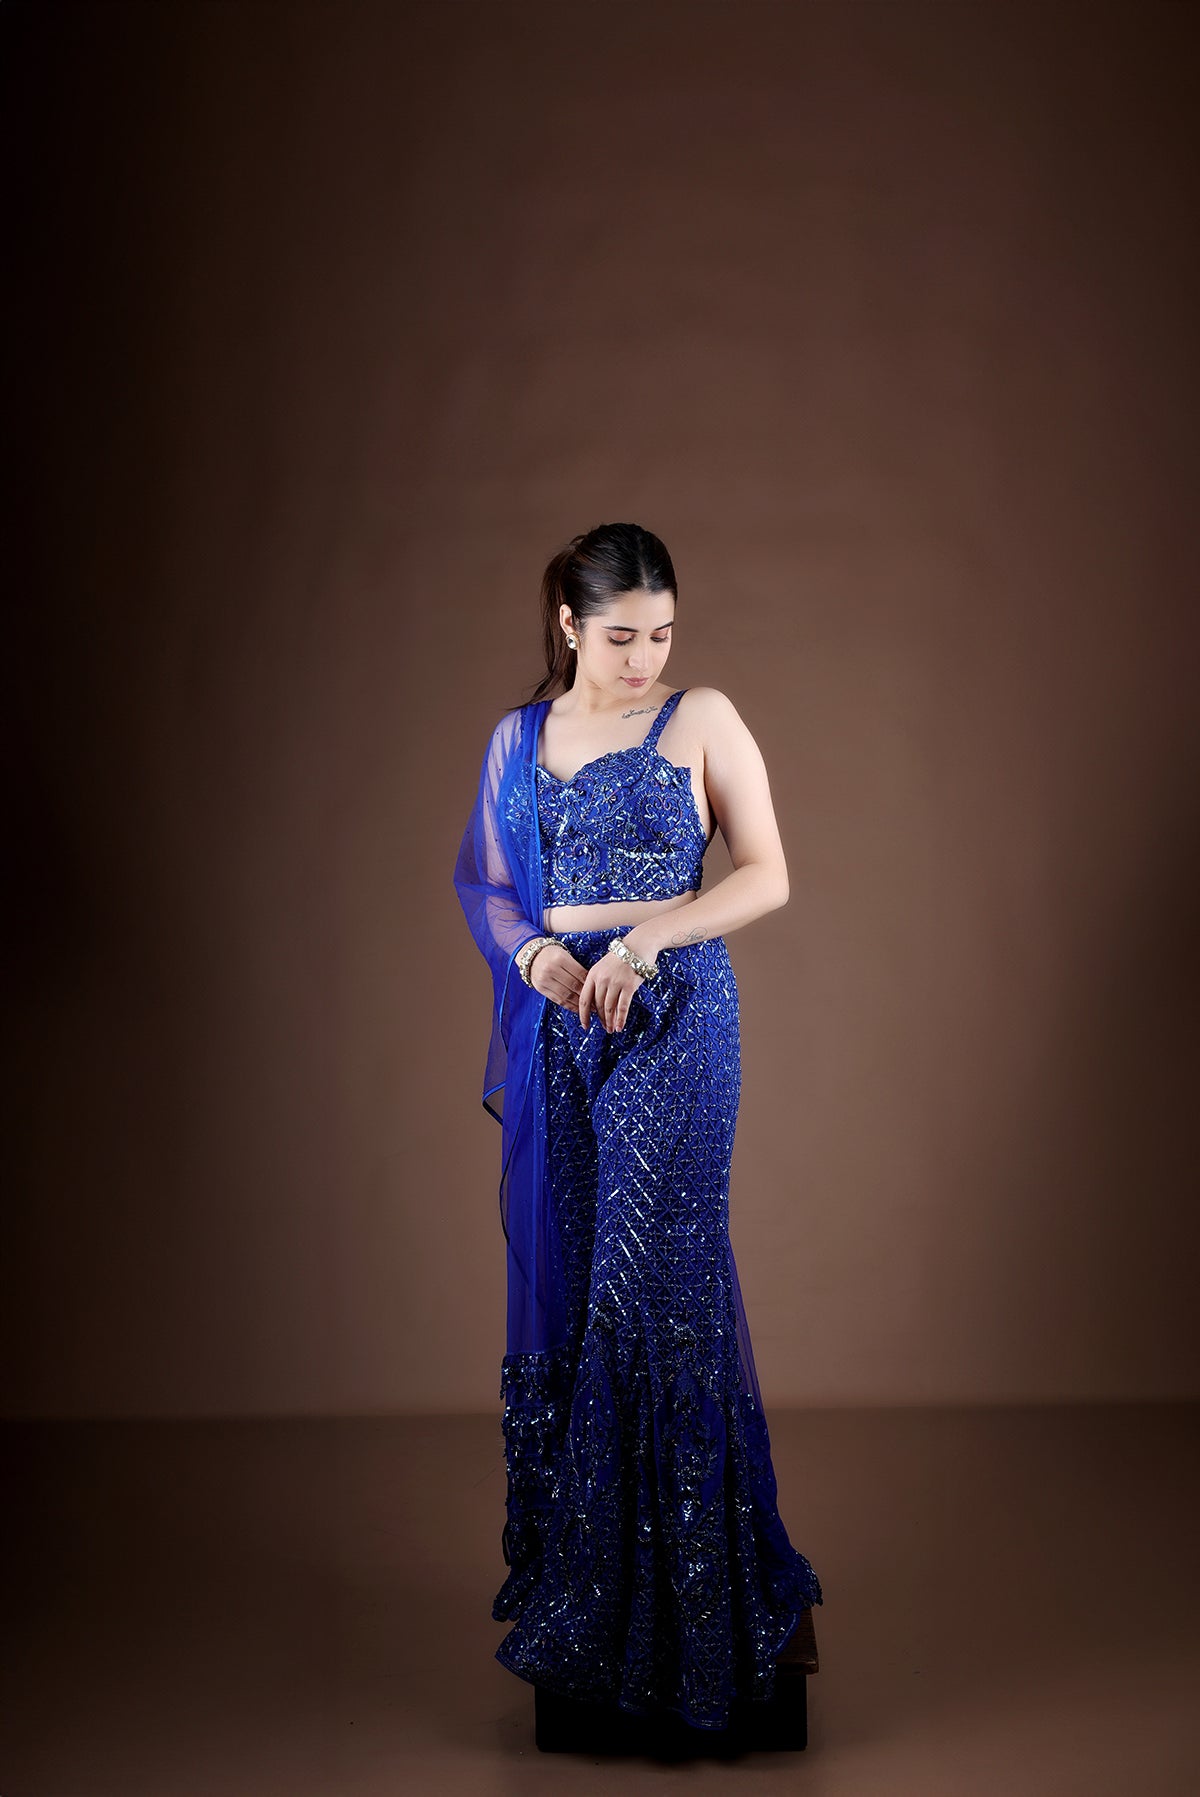 Royal Blue Sharara with Top adorned with hand embroidery